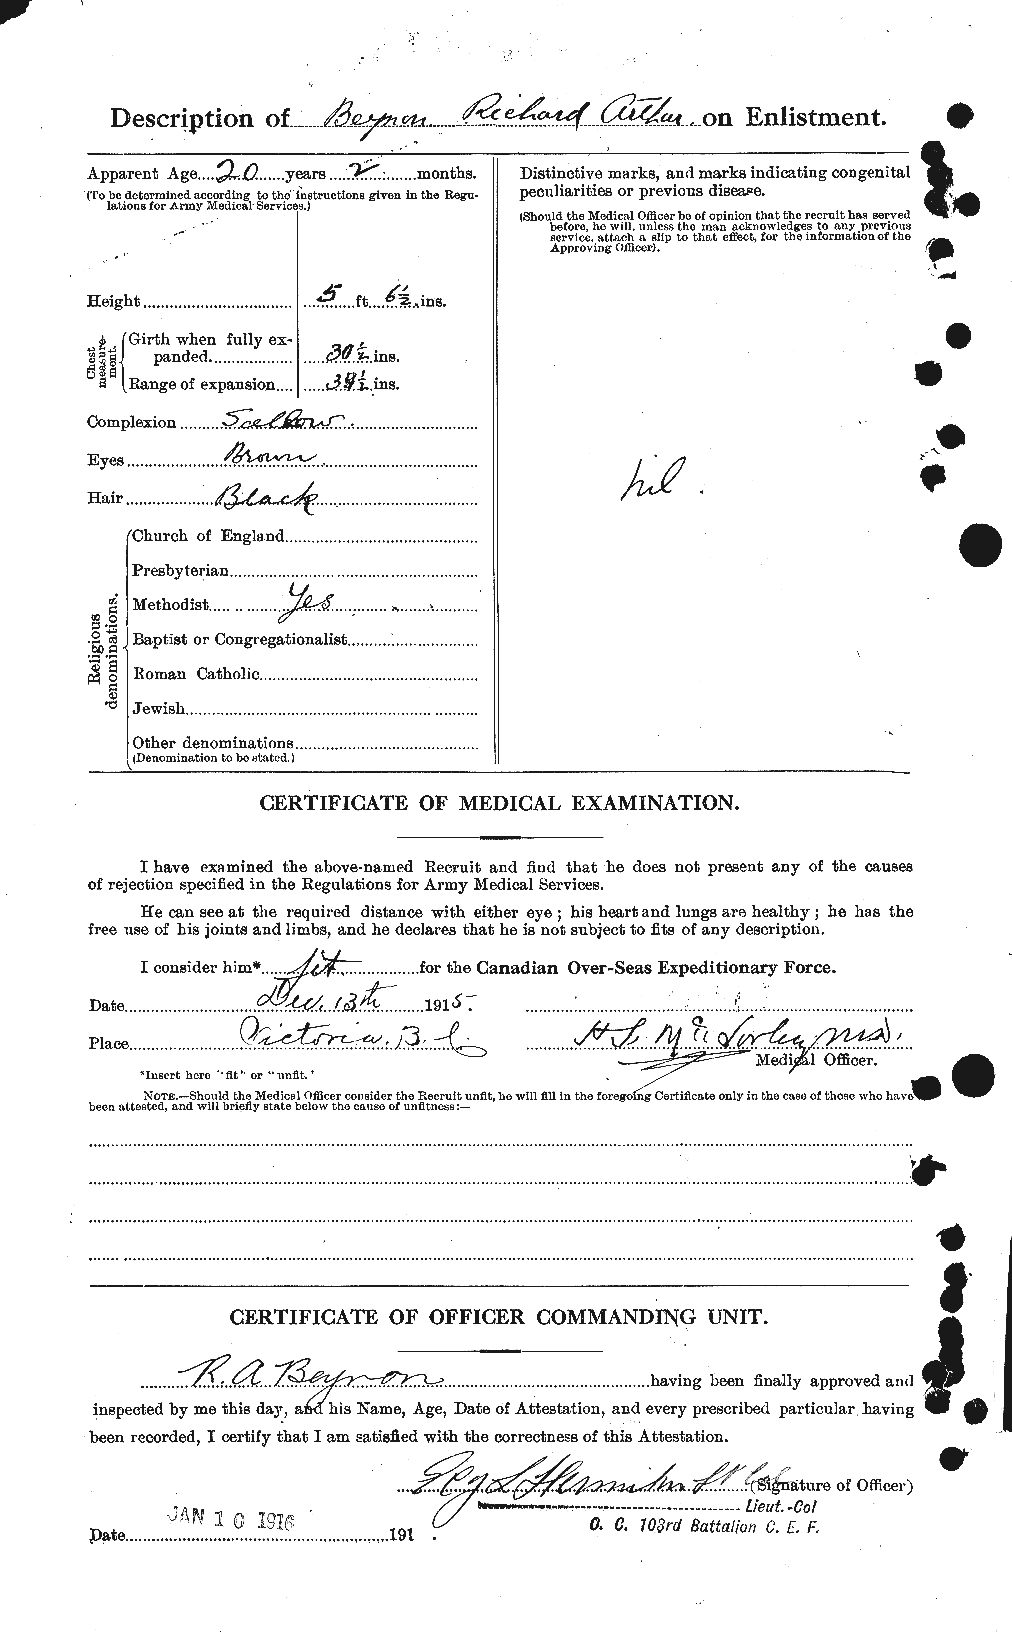 Personnel Records of the First World War - CEF 237520b